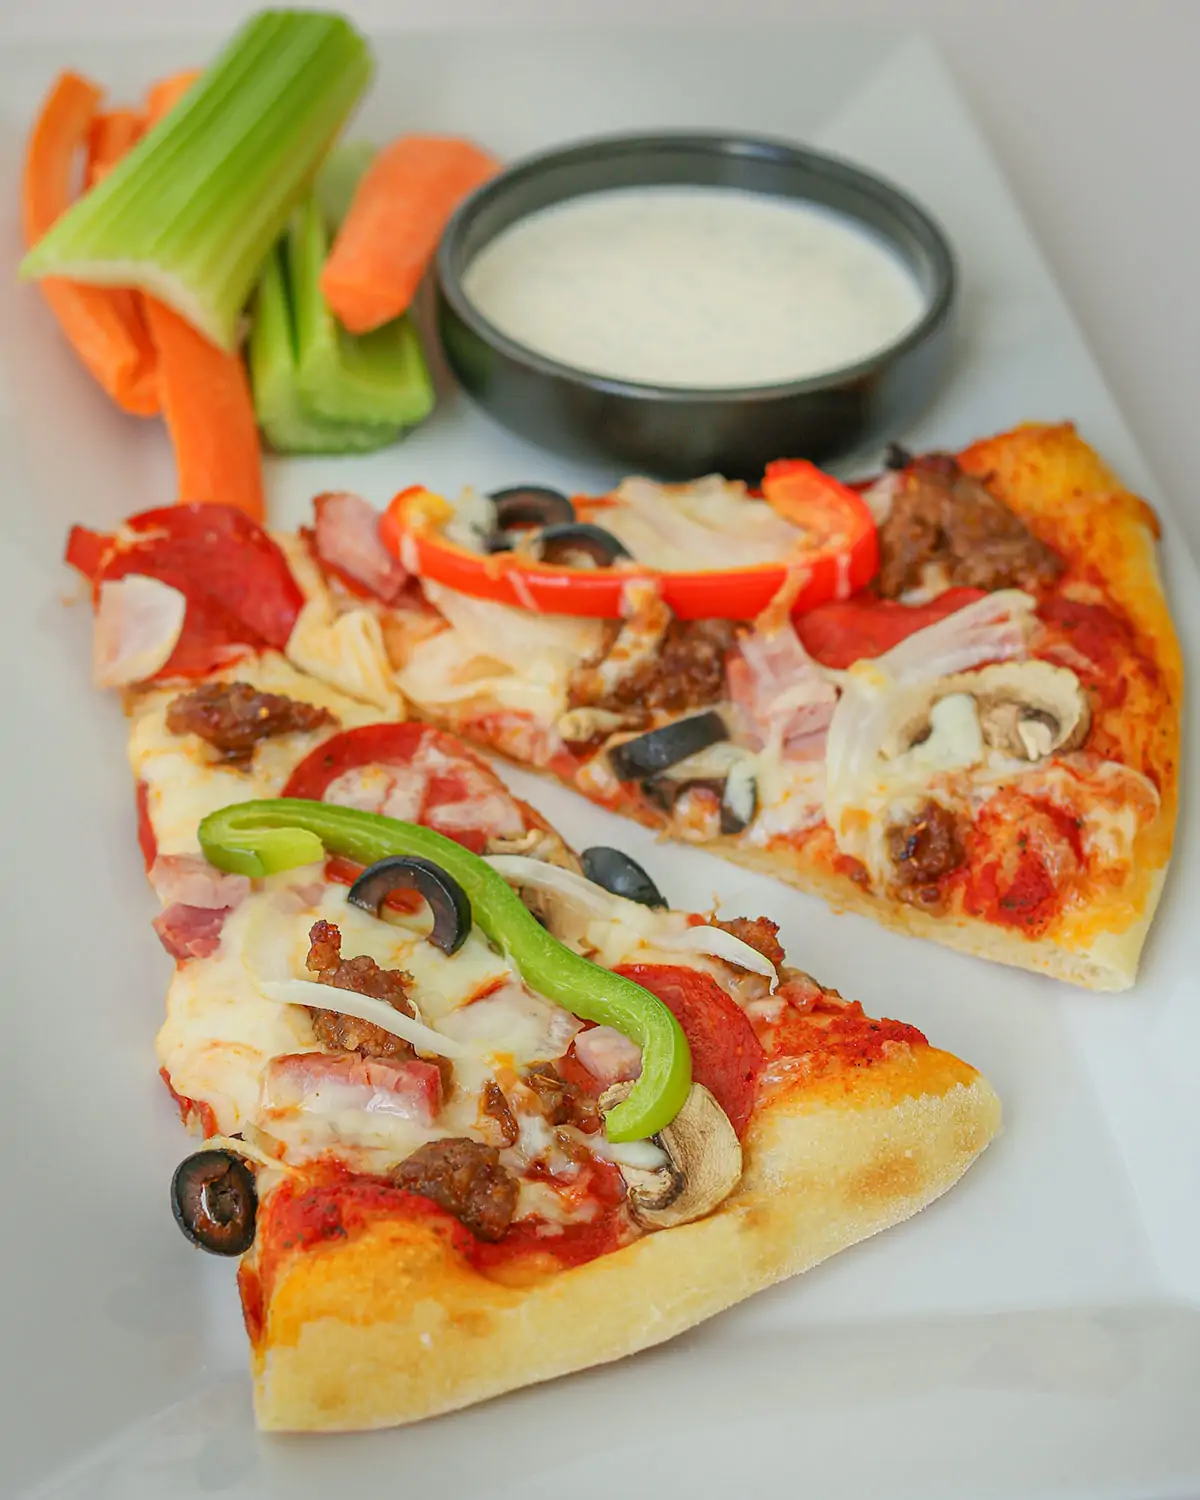 two slices of supreme pizza on a rectangle platter with veggies and ranch dip.